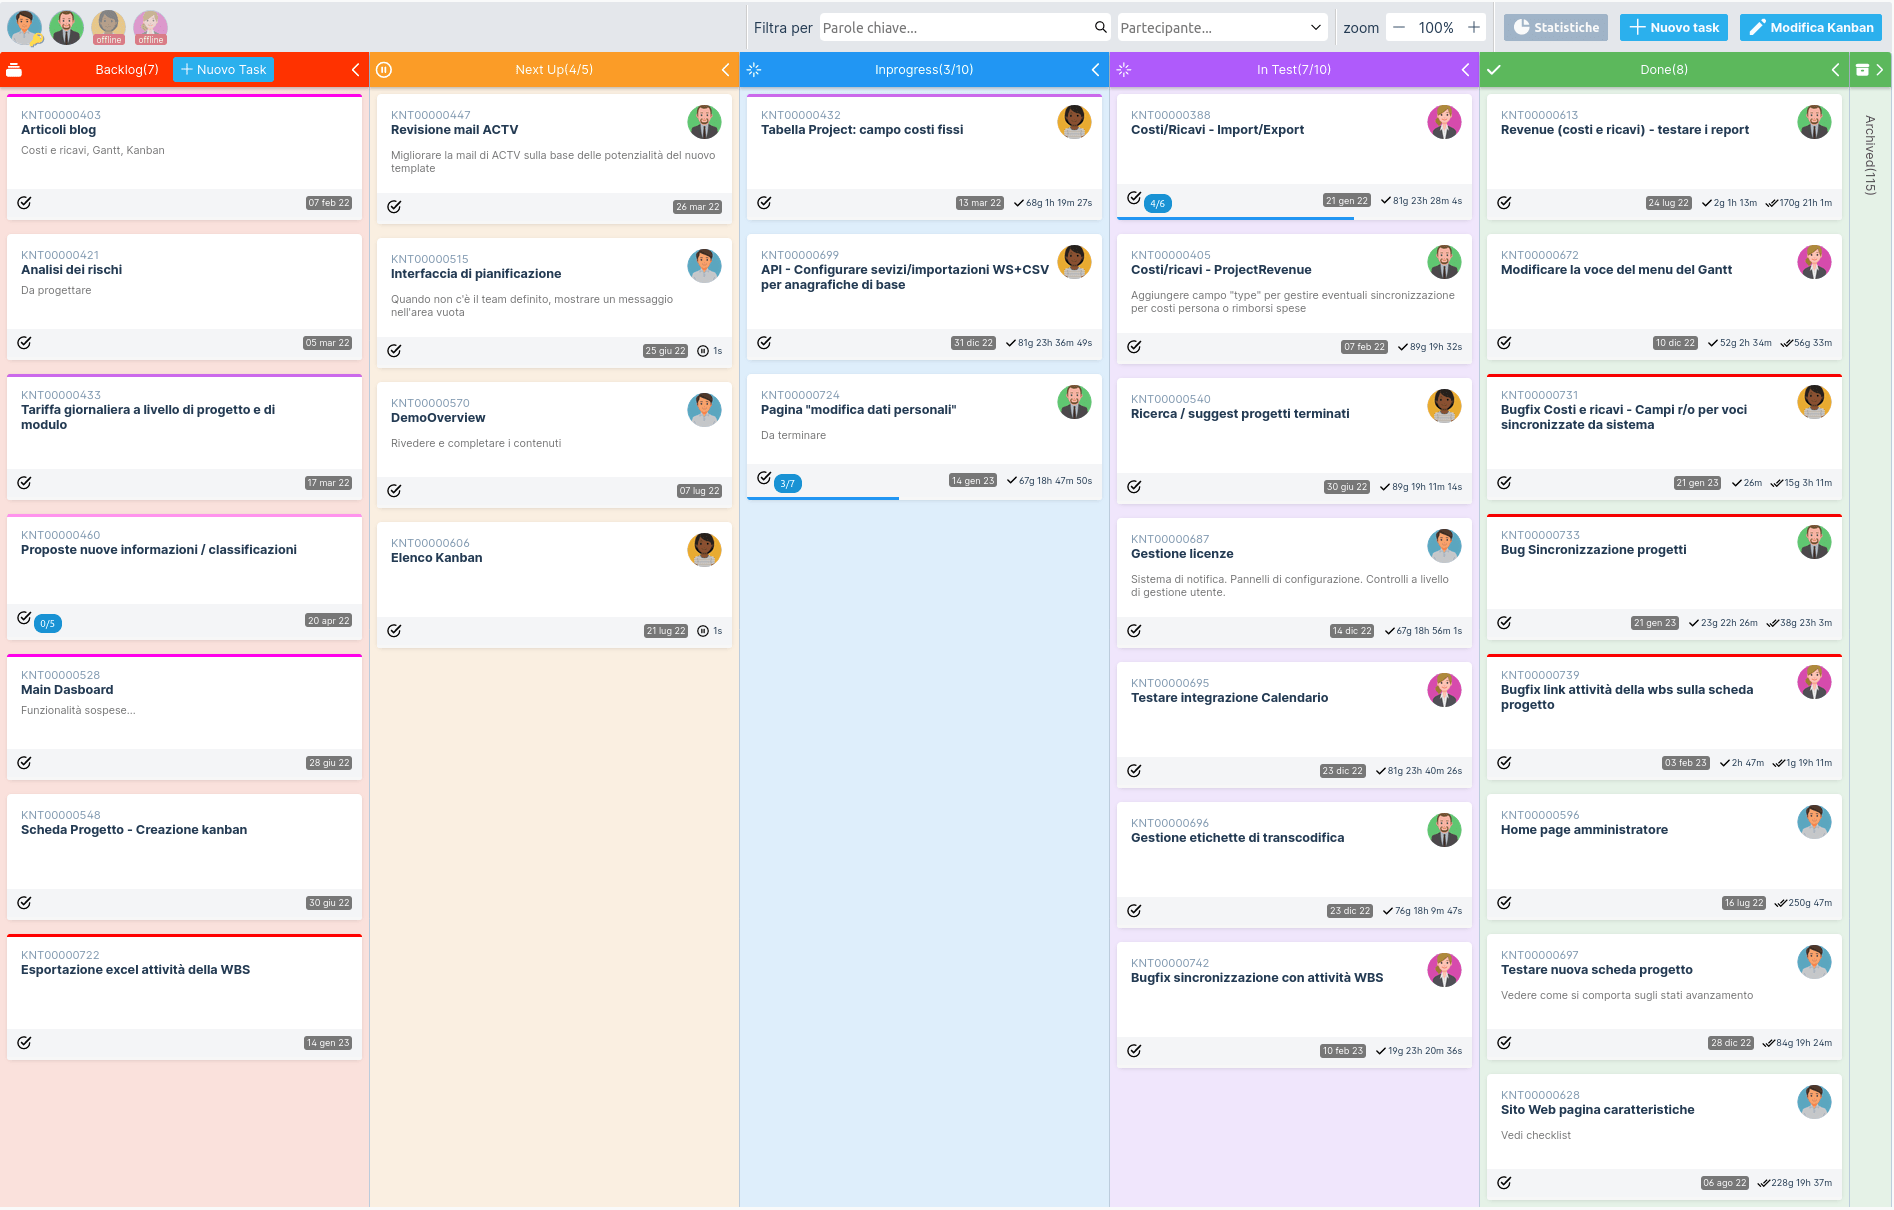 An example kanban board with 5 columns. Each card shows the task title and description, the current owner and the work advancement.Team members are shown along with their online status. Filters are provided to easily find and focus on the work at hand.